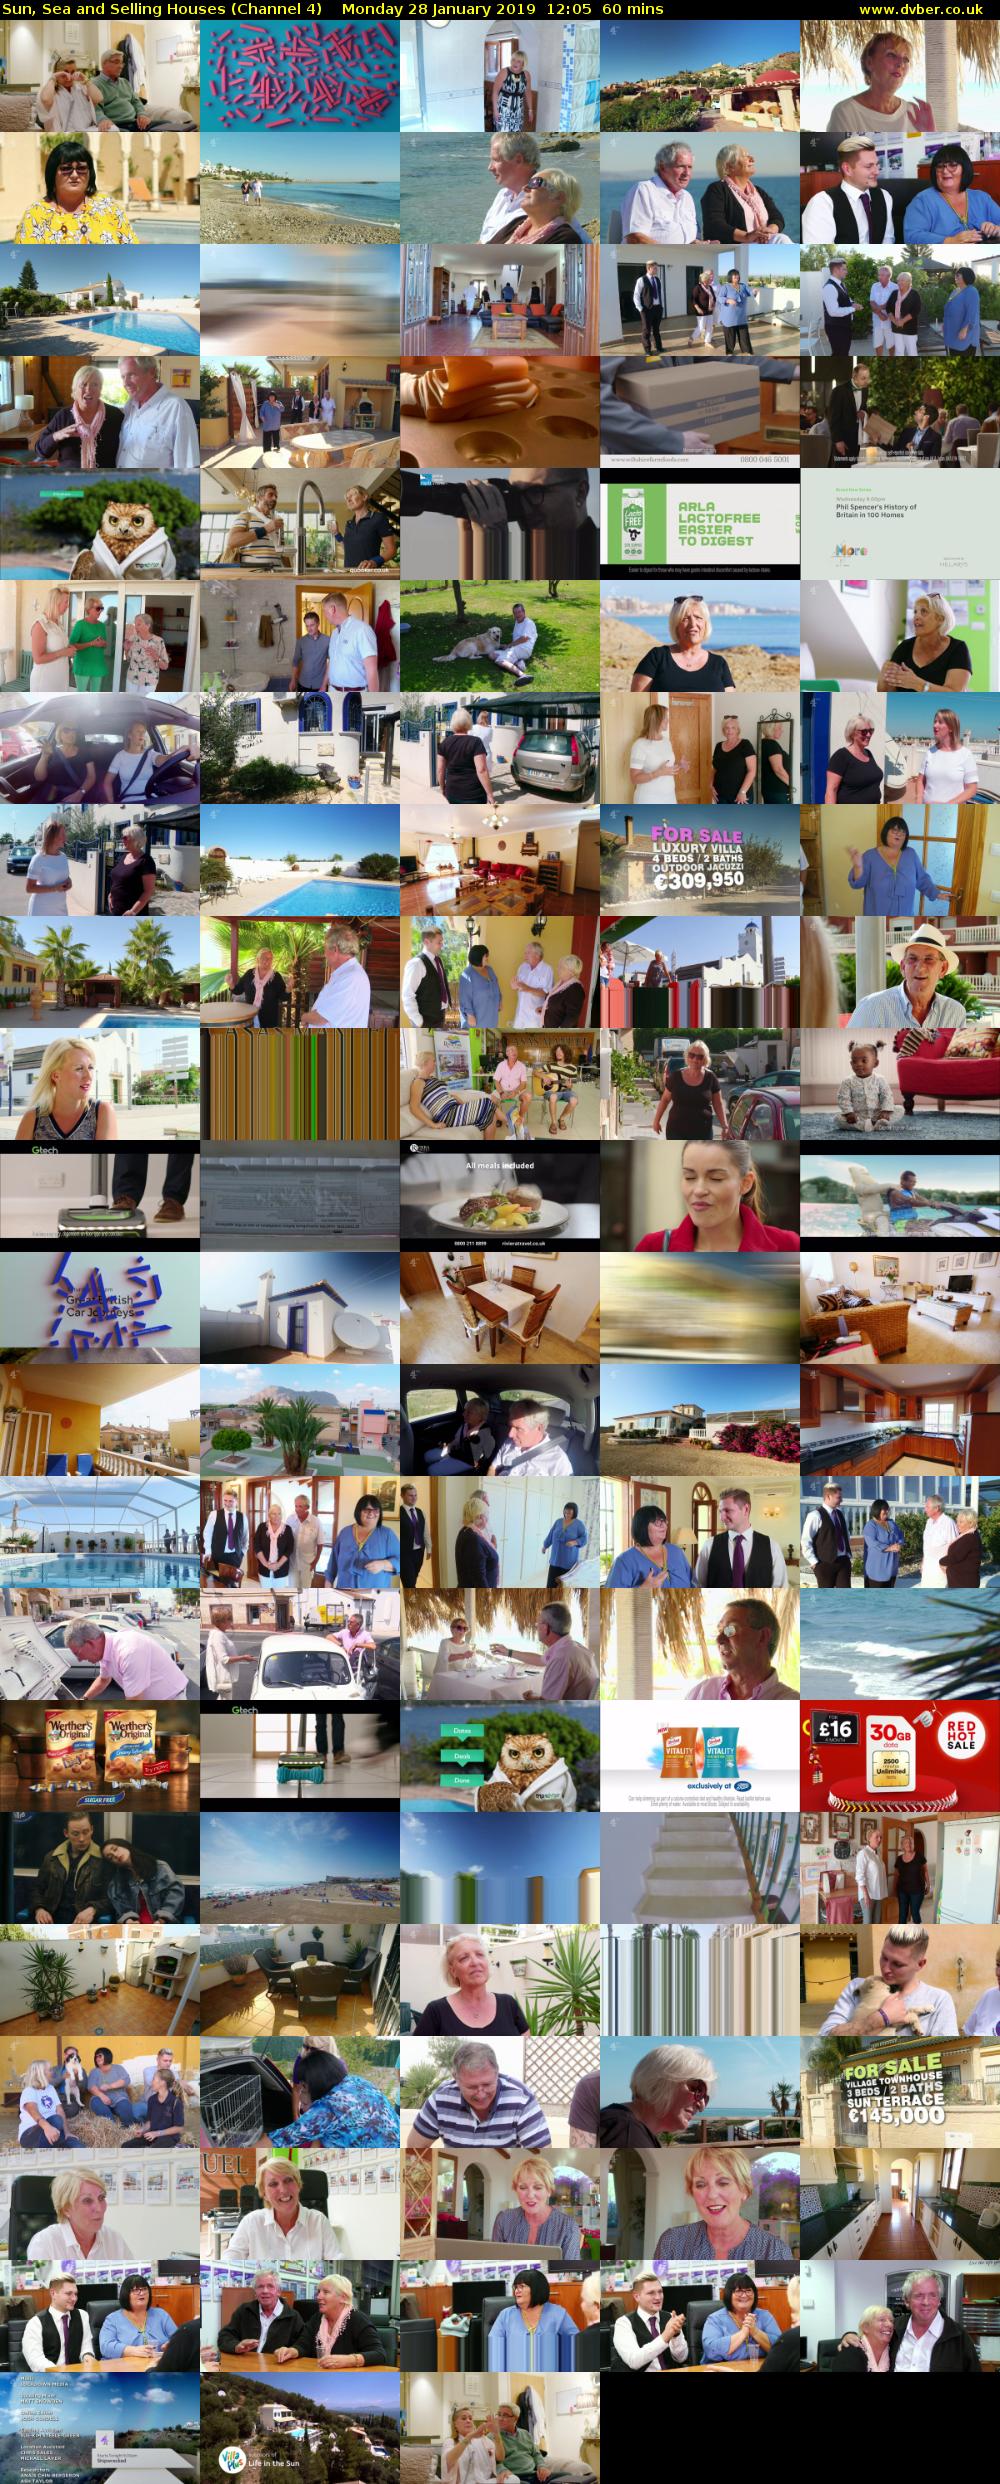 Sun, Sea and Selling Houses (Channel 4) Monday 28 January 2019 12:05 - 13:05